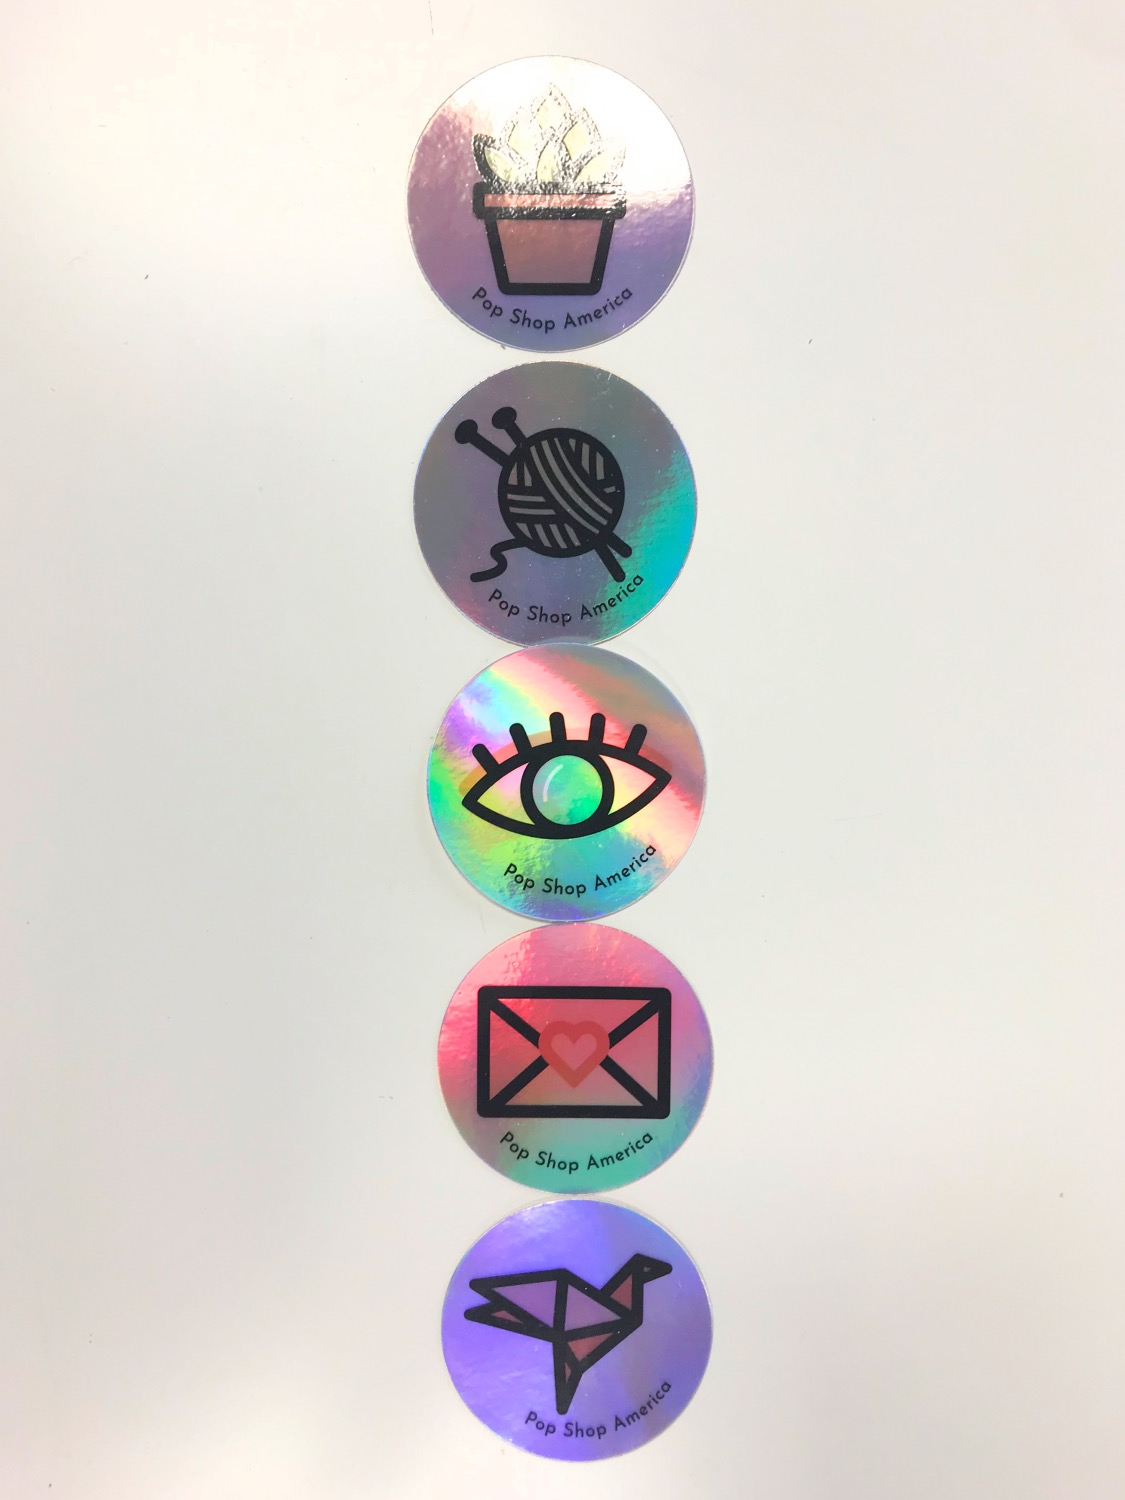 totem of holographic stickers from stickermule